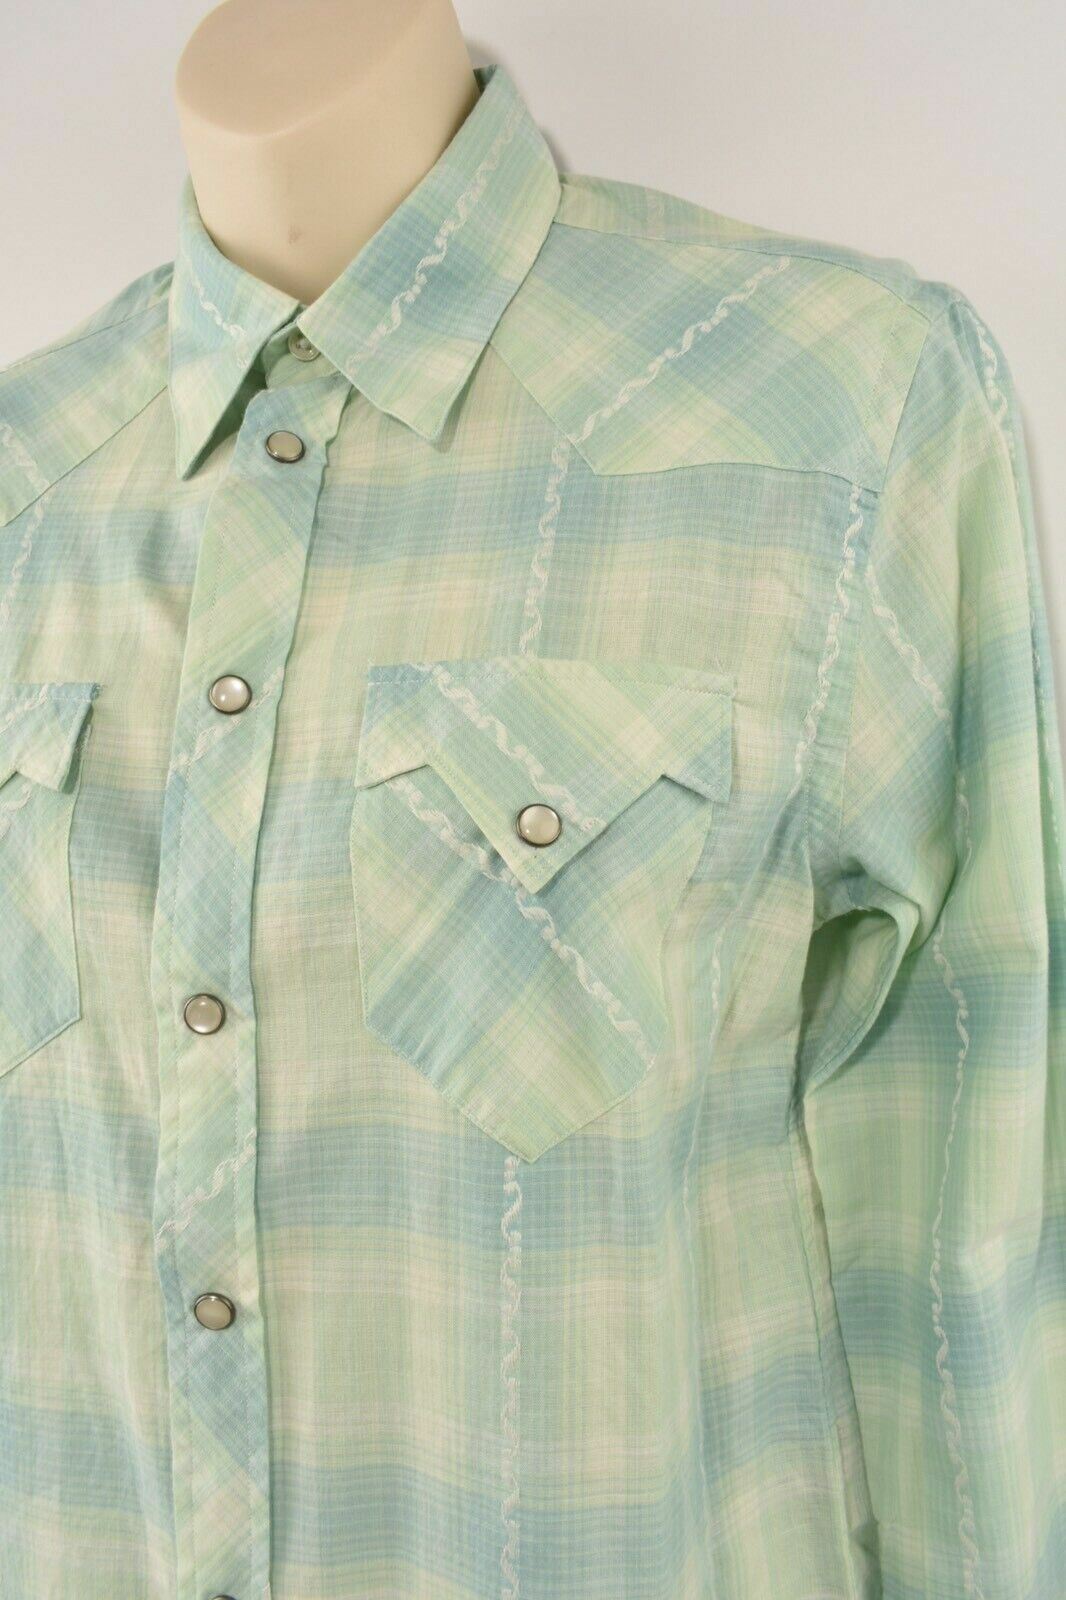 POLO RALPH LAUREN Women's Relaxed Fit Checked Shirt, Green, size SMALL